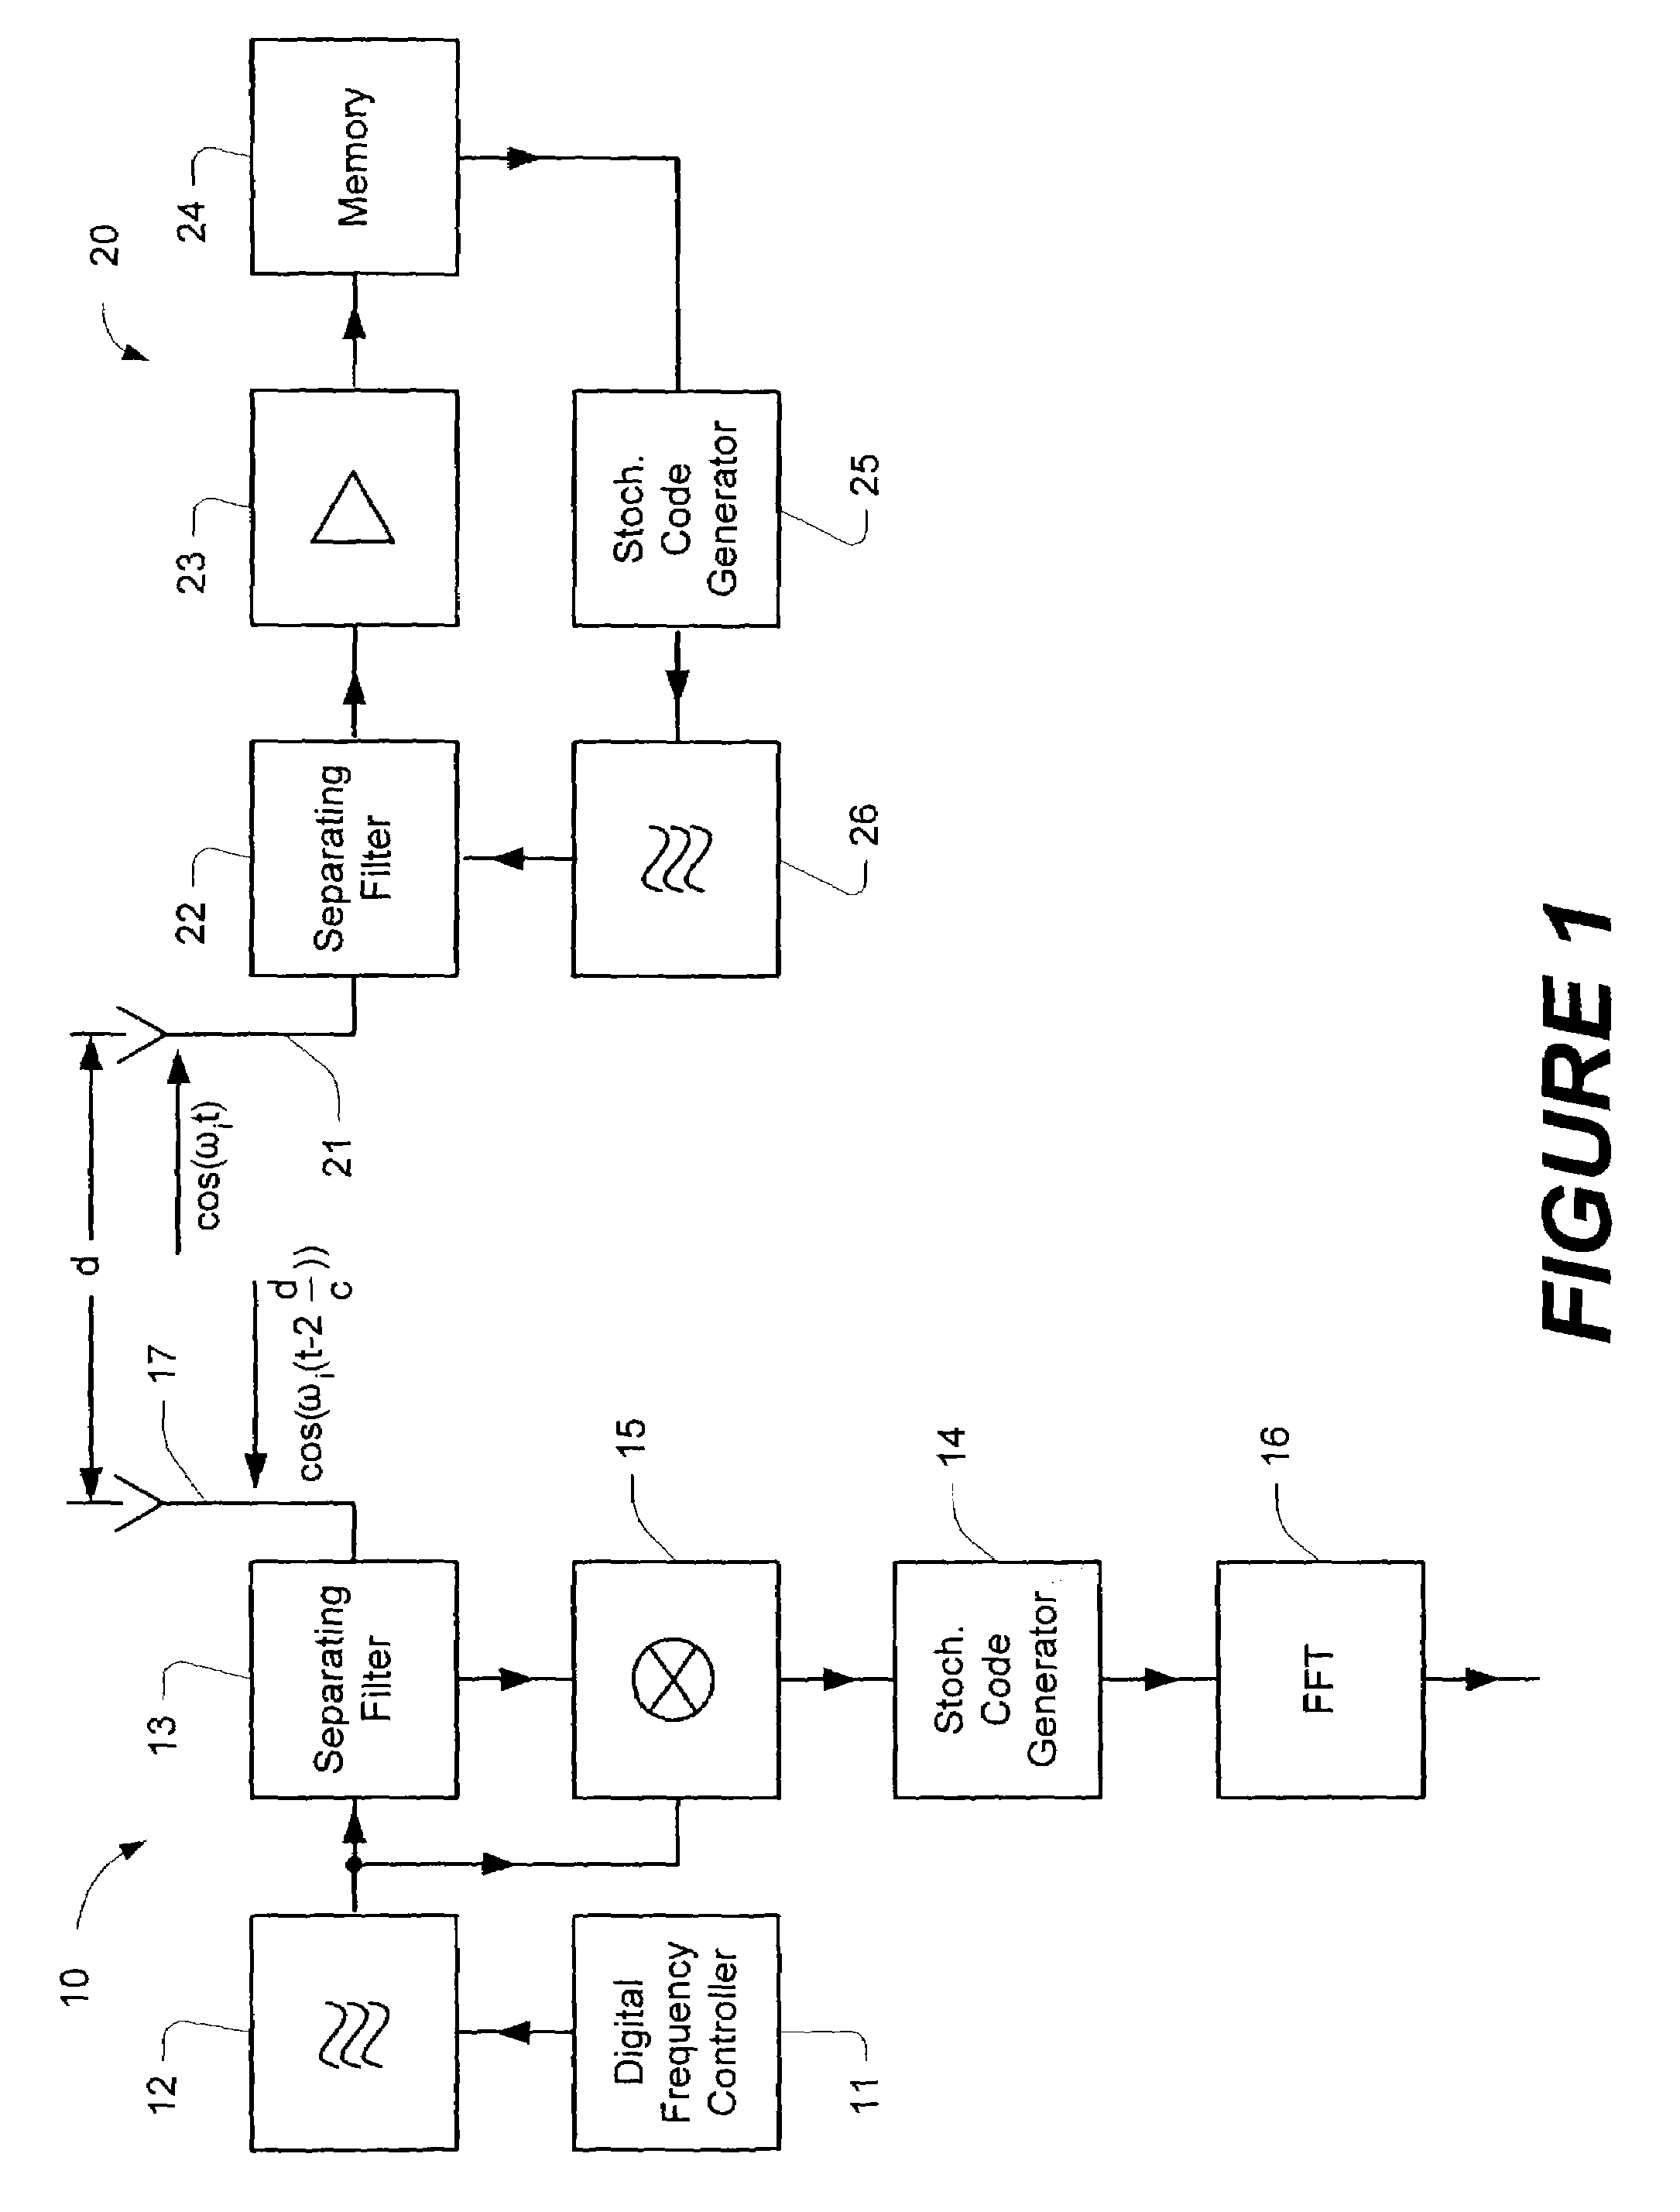 Identification system for verifying an authorization to access an object or to use an object, particularly a motor vehicle